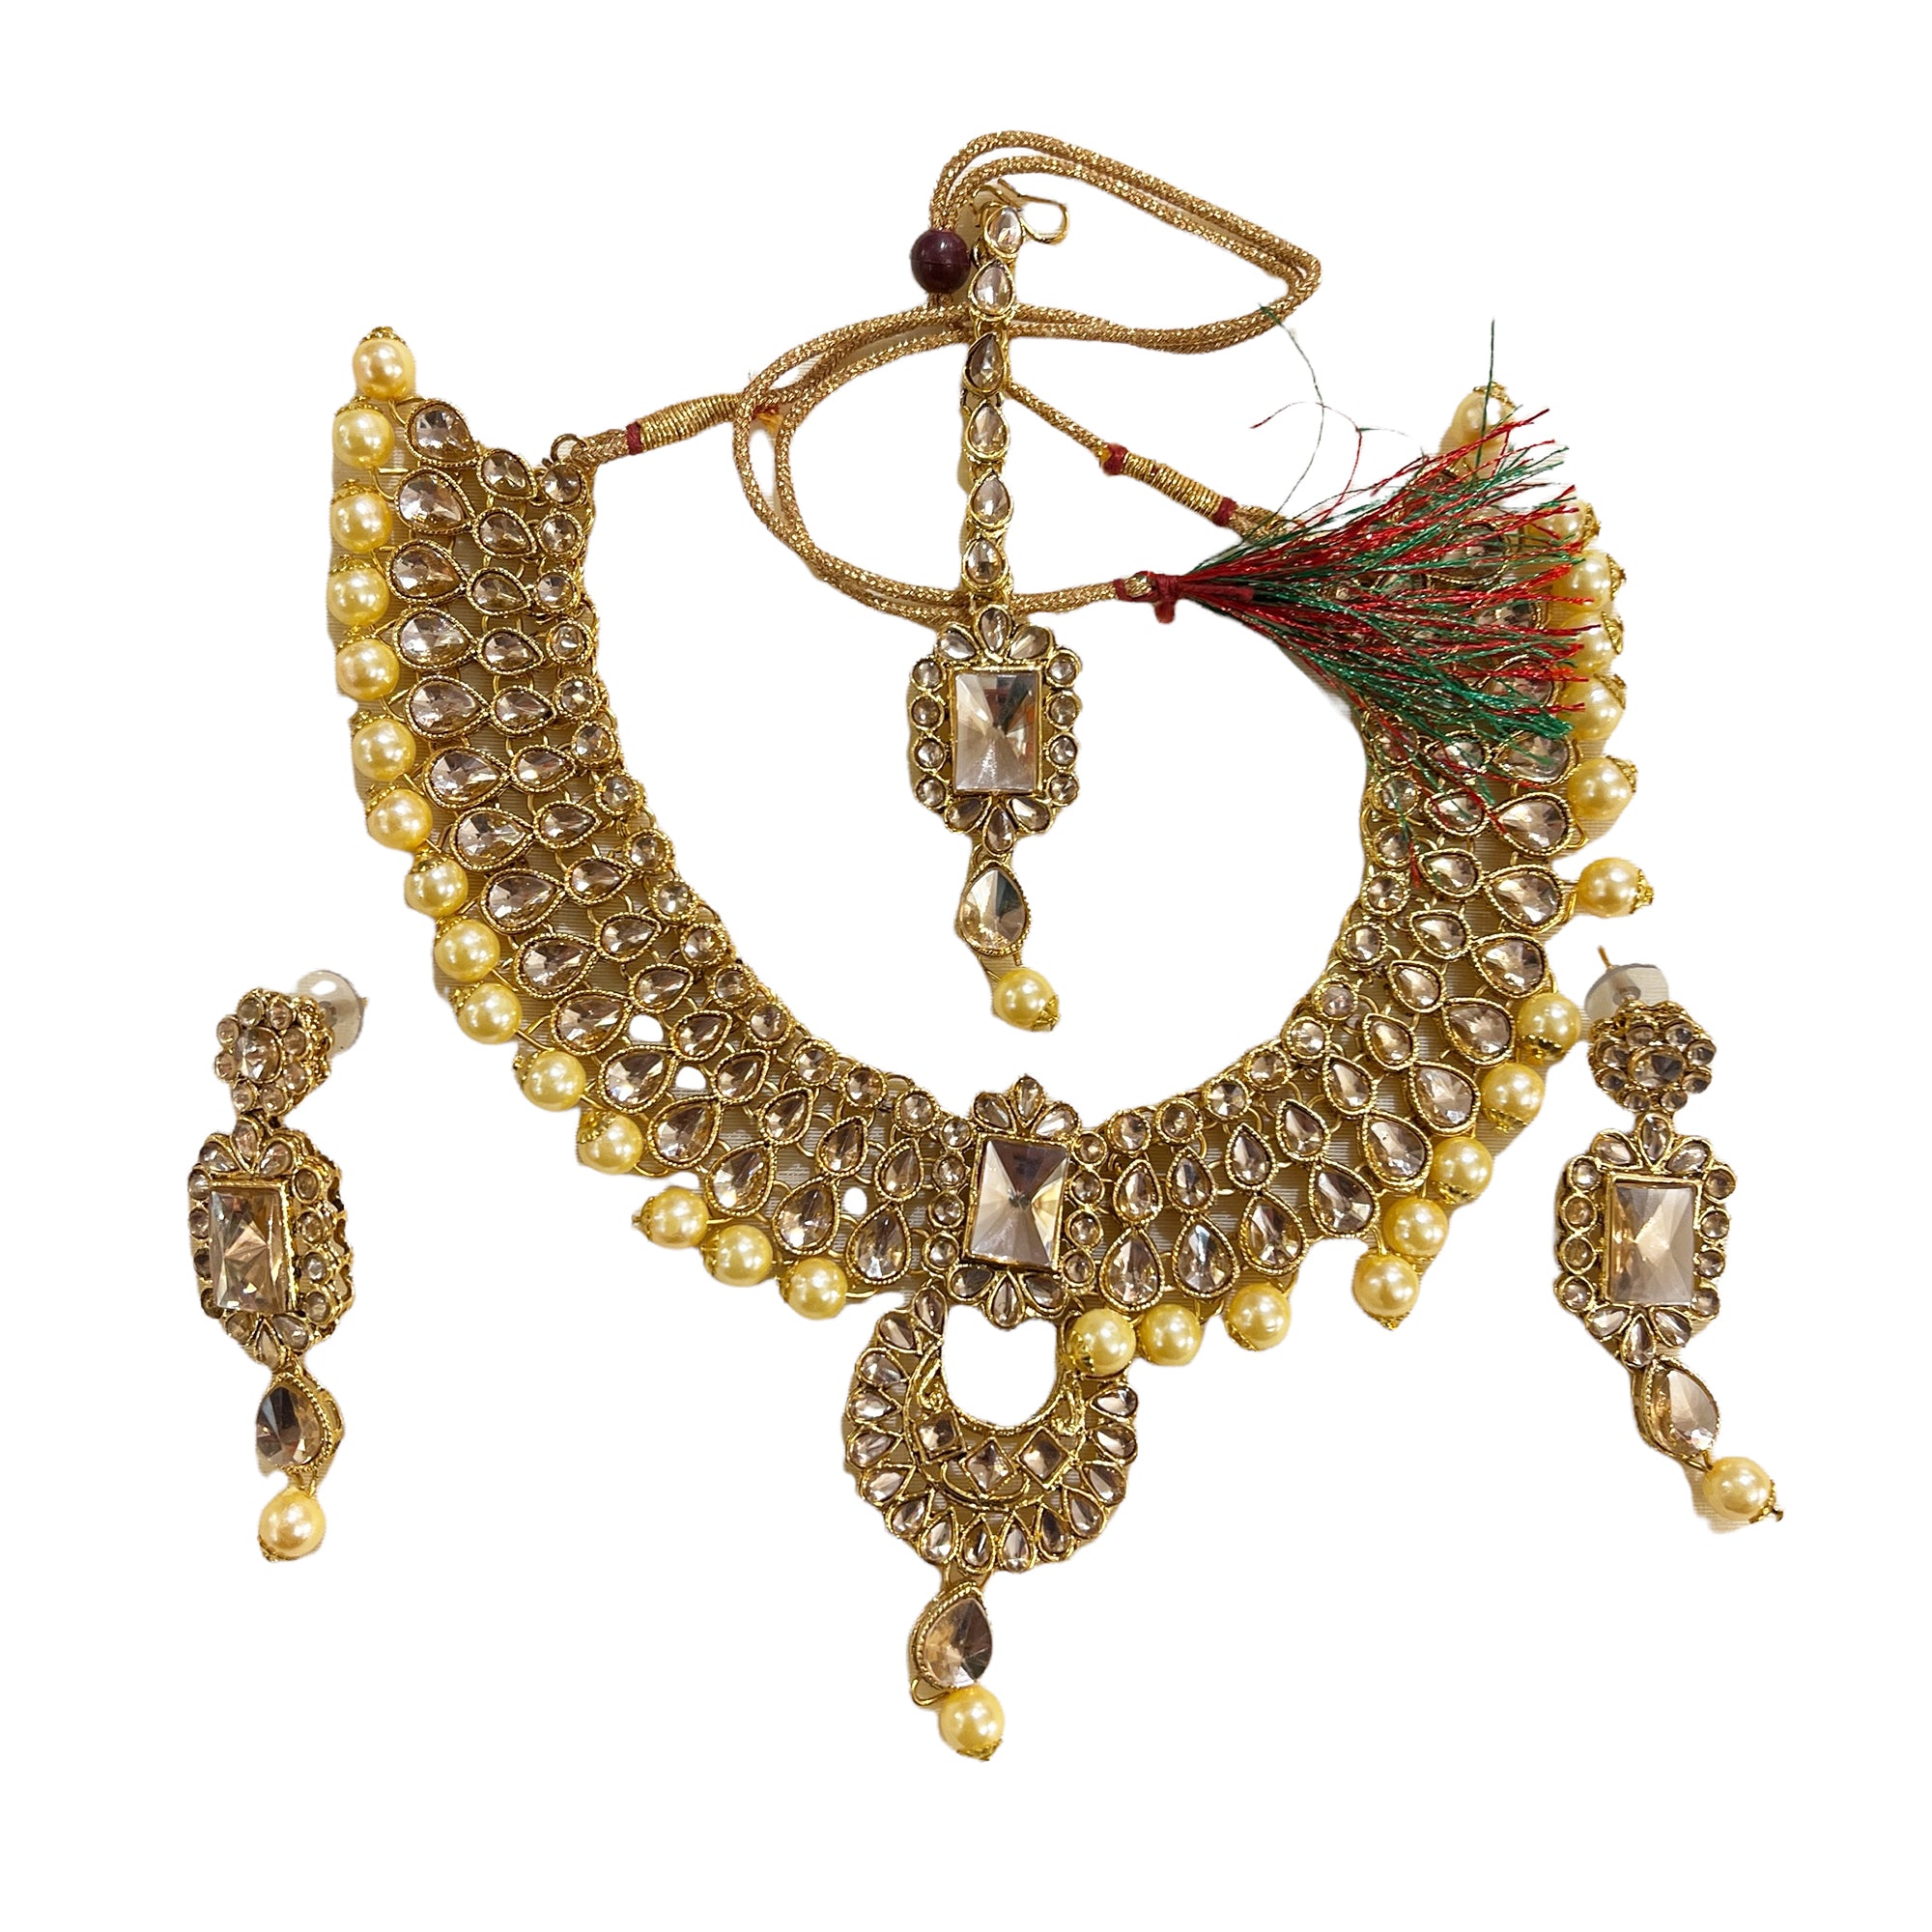 DT Gold Necklace Sets-3 Styles - Vintage India NYC